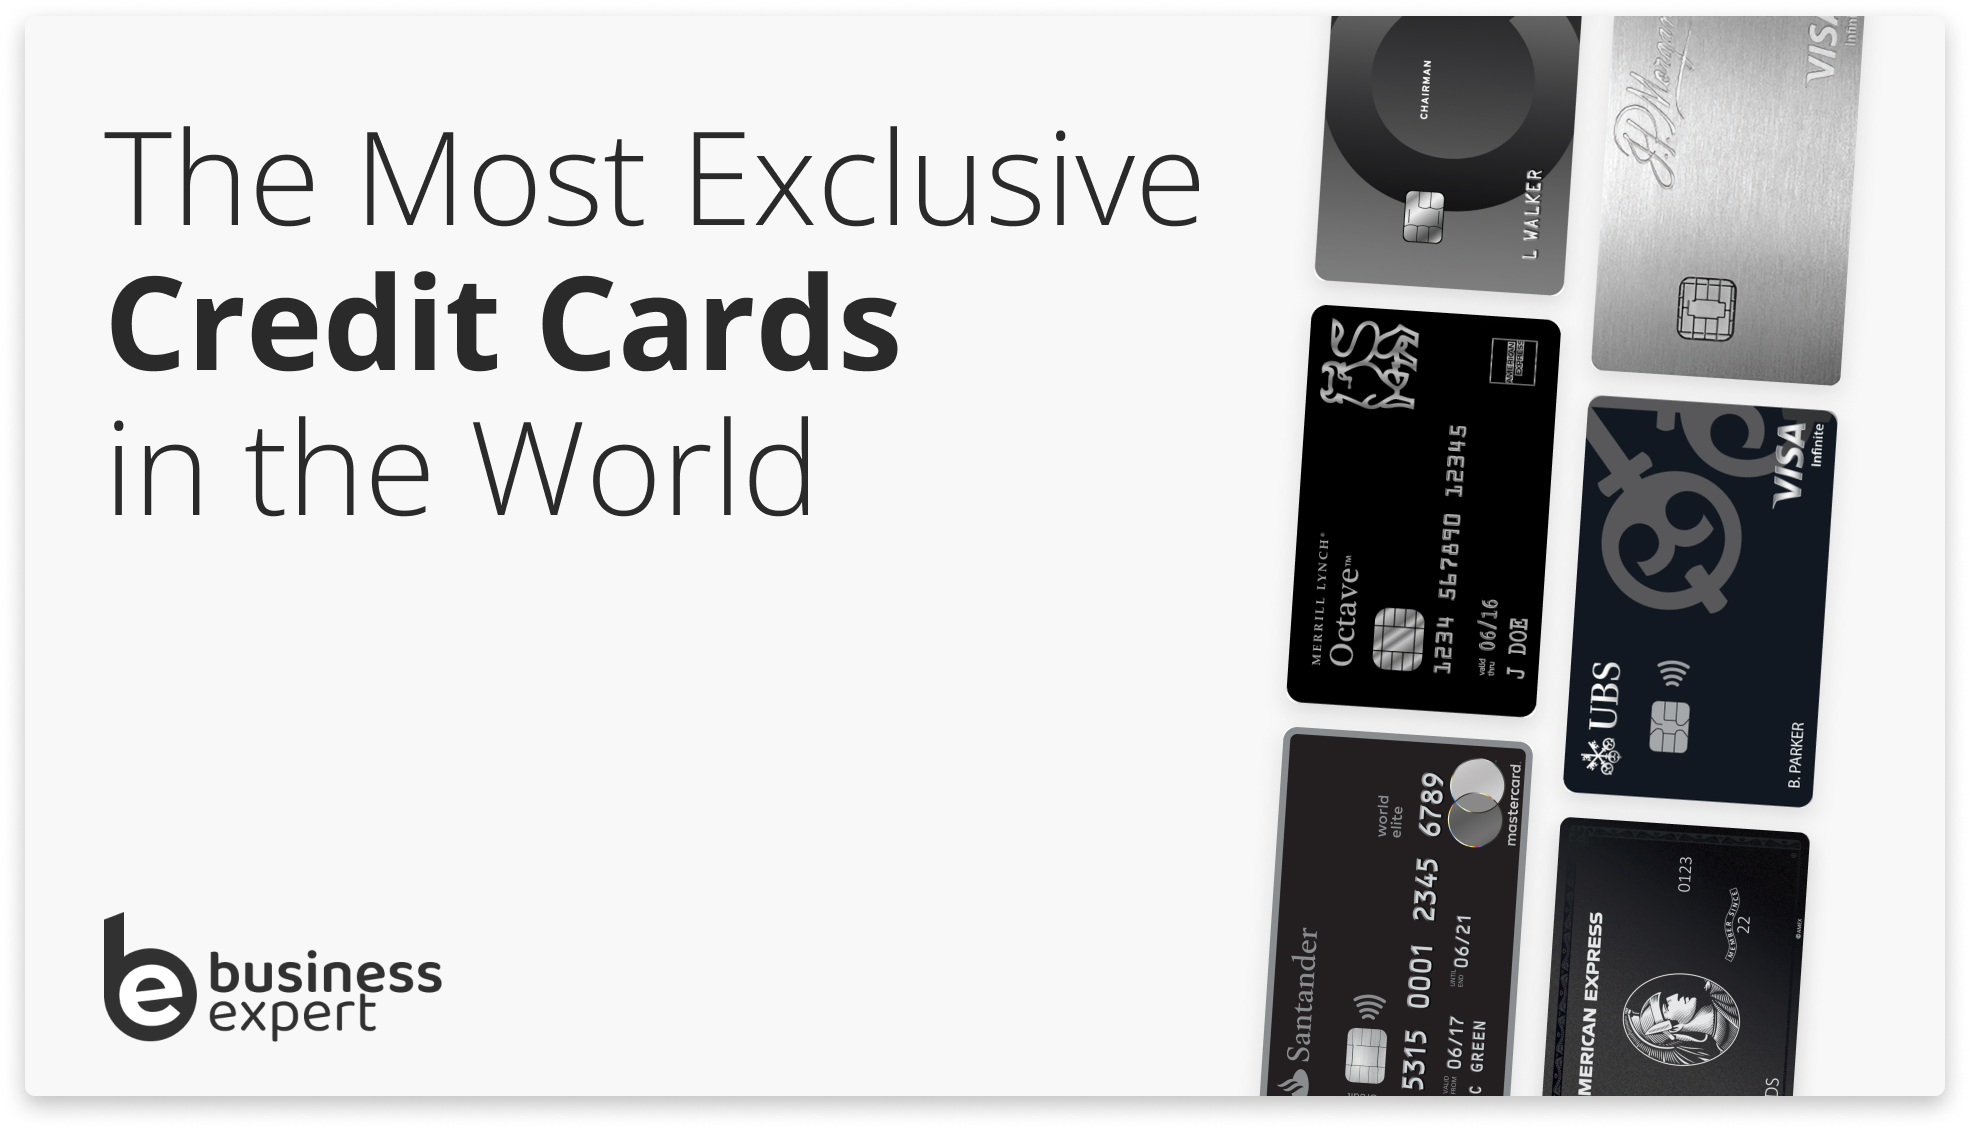 4 Credit Cards for the Super Rich